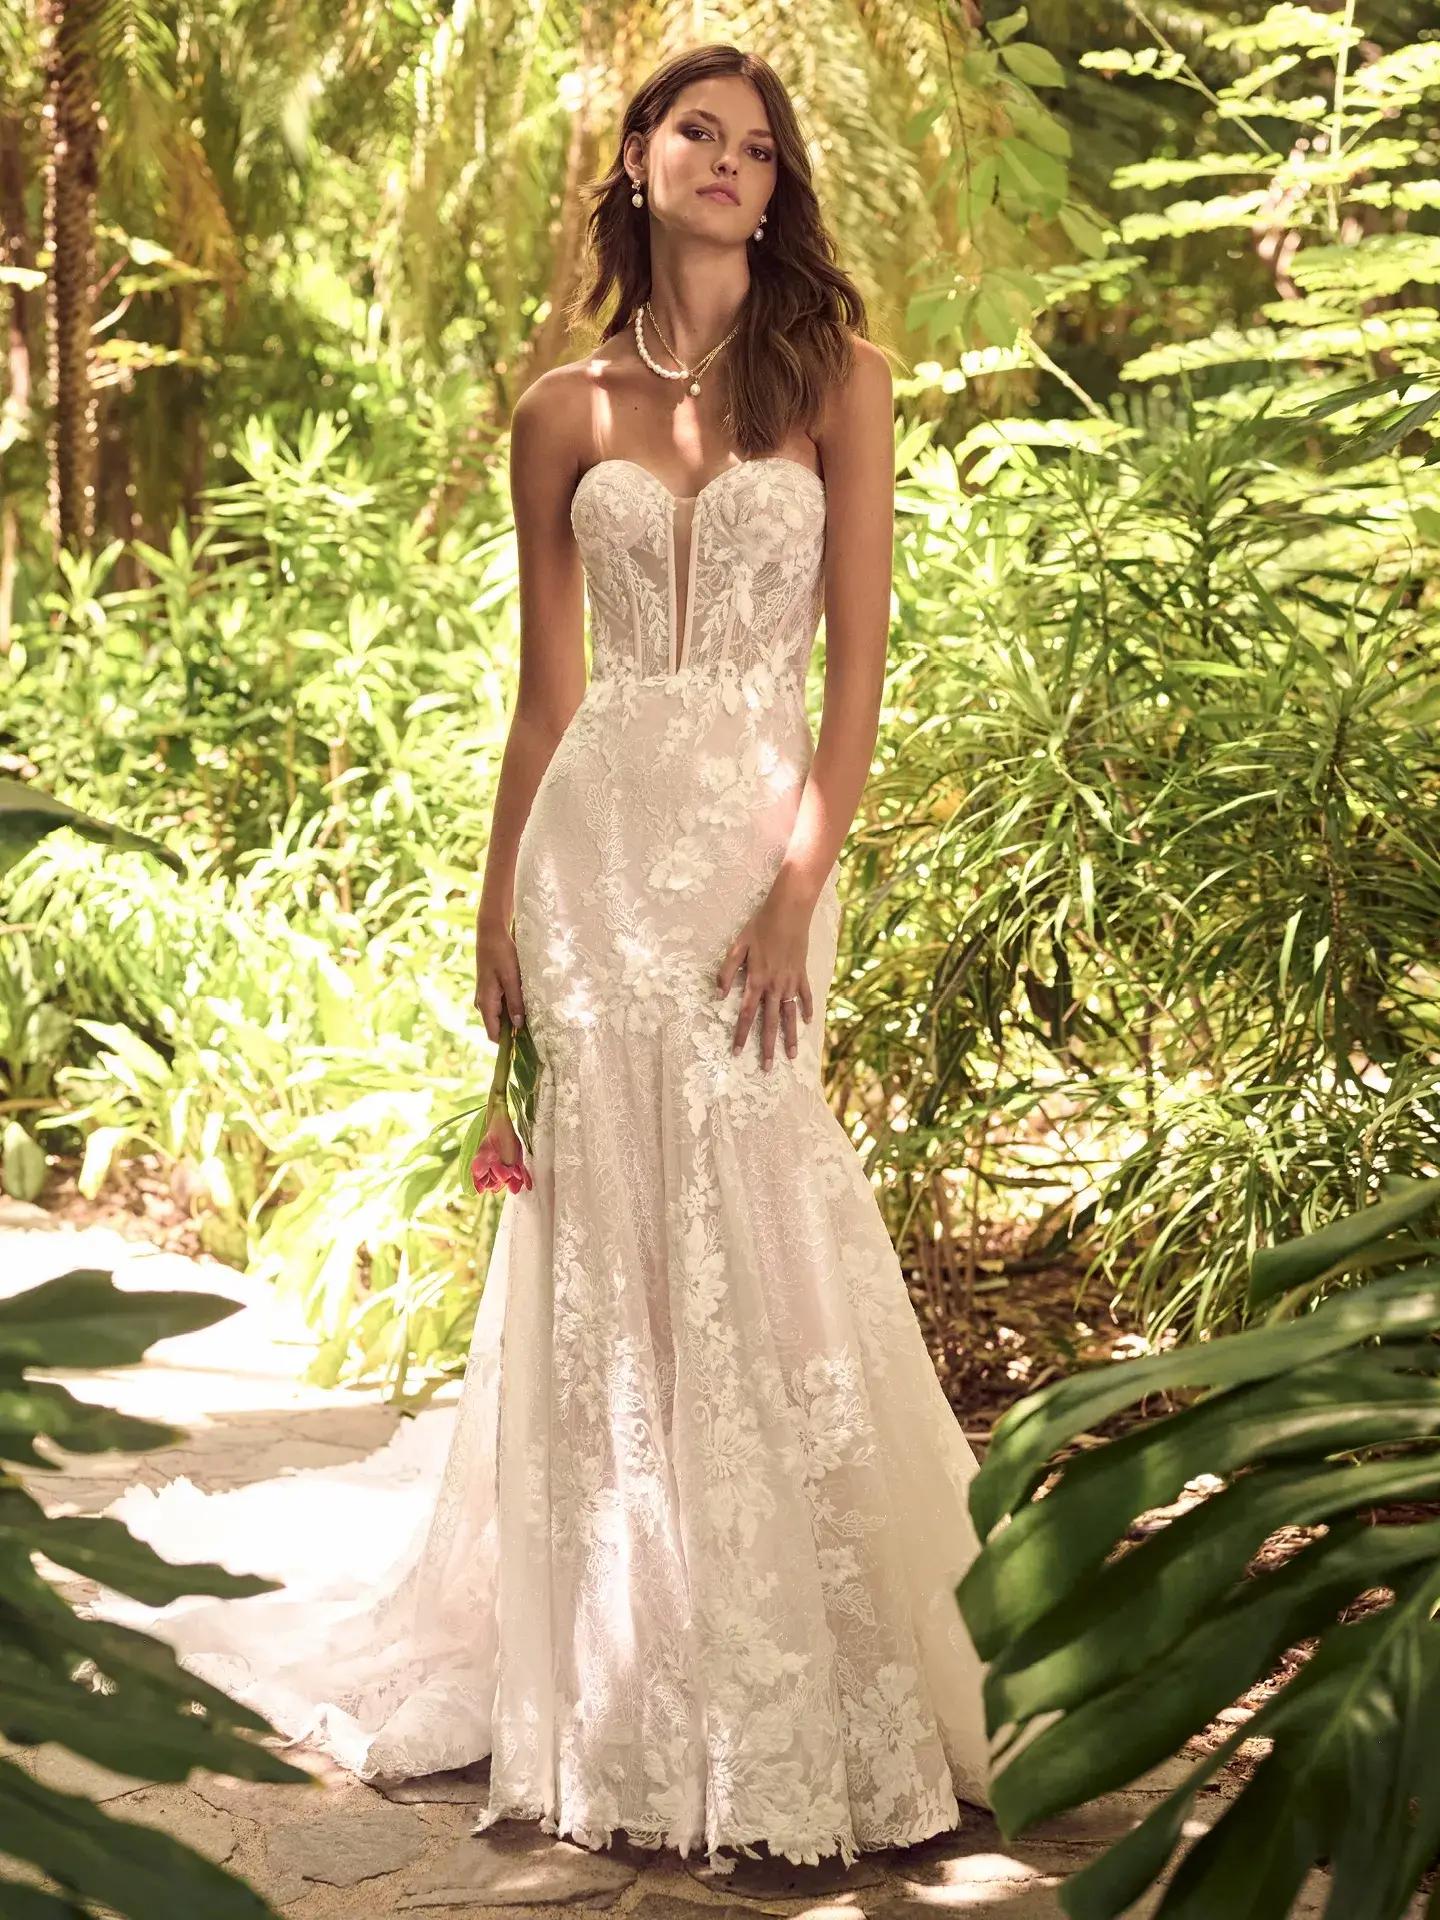 Discovering the Unique Styles of Maggie Sottero Gowns Image